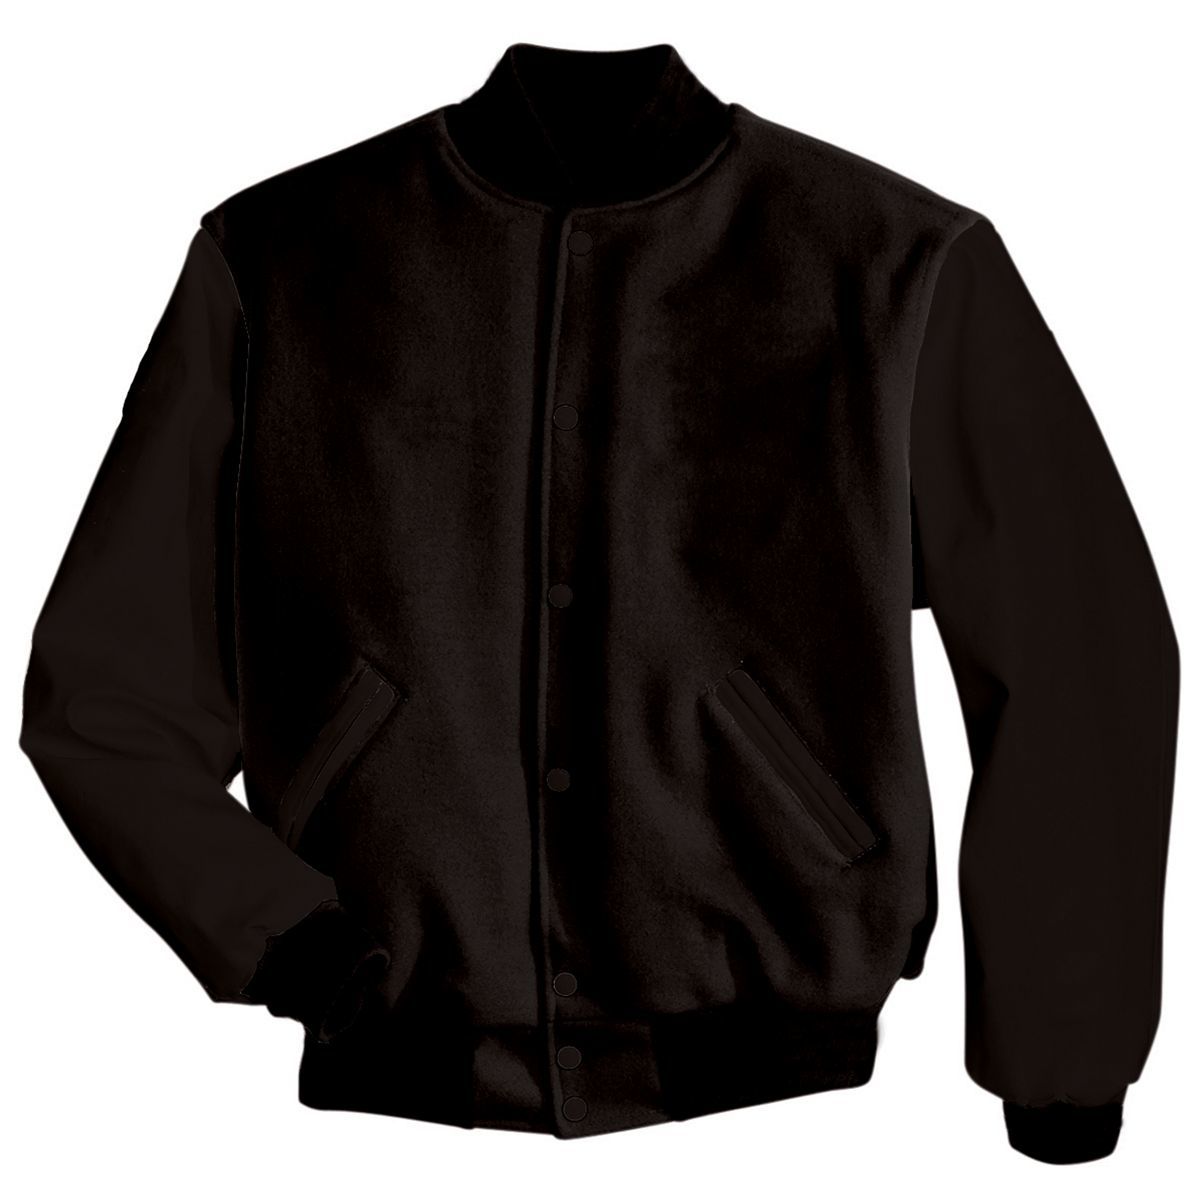 Holloway Award Jacket in Black  -Part of the Adult, Adult-Jacket, Holloway, Outerwear product lines at KanaleyCreations.com